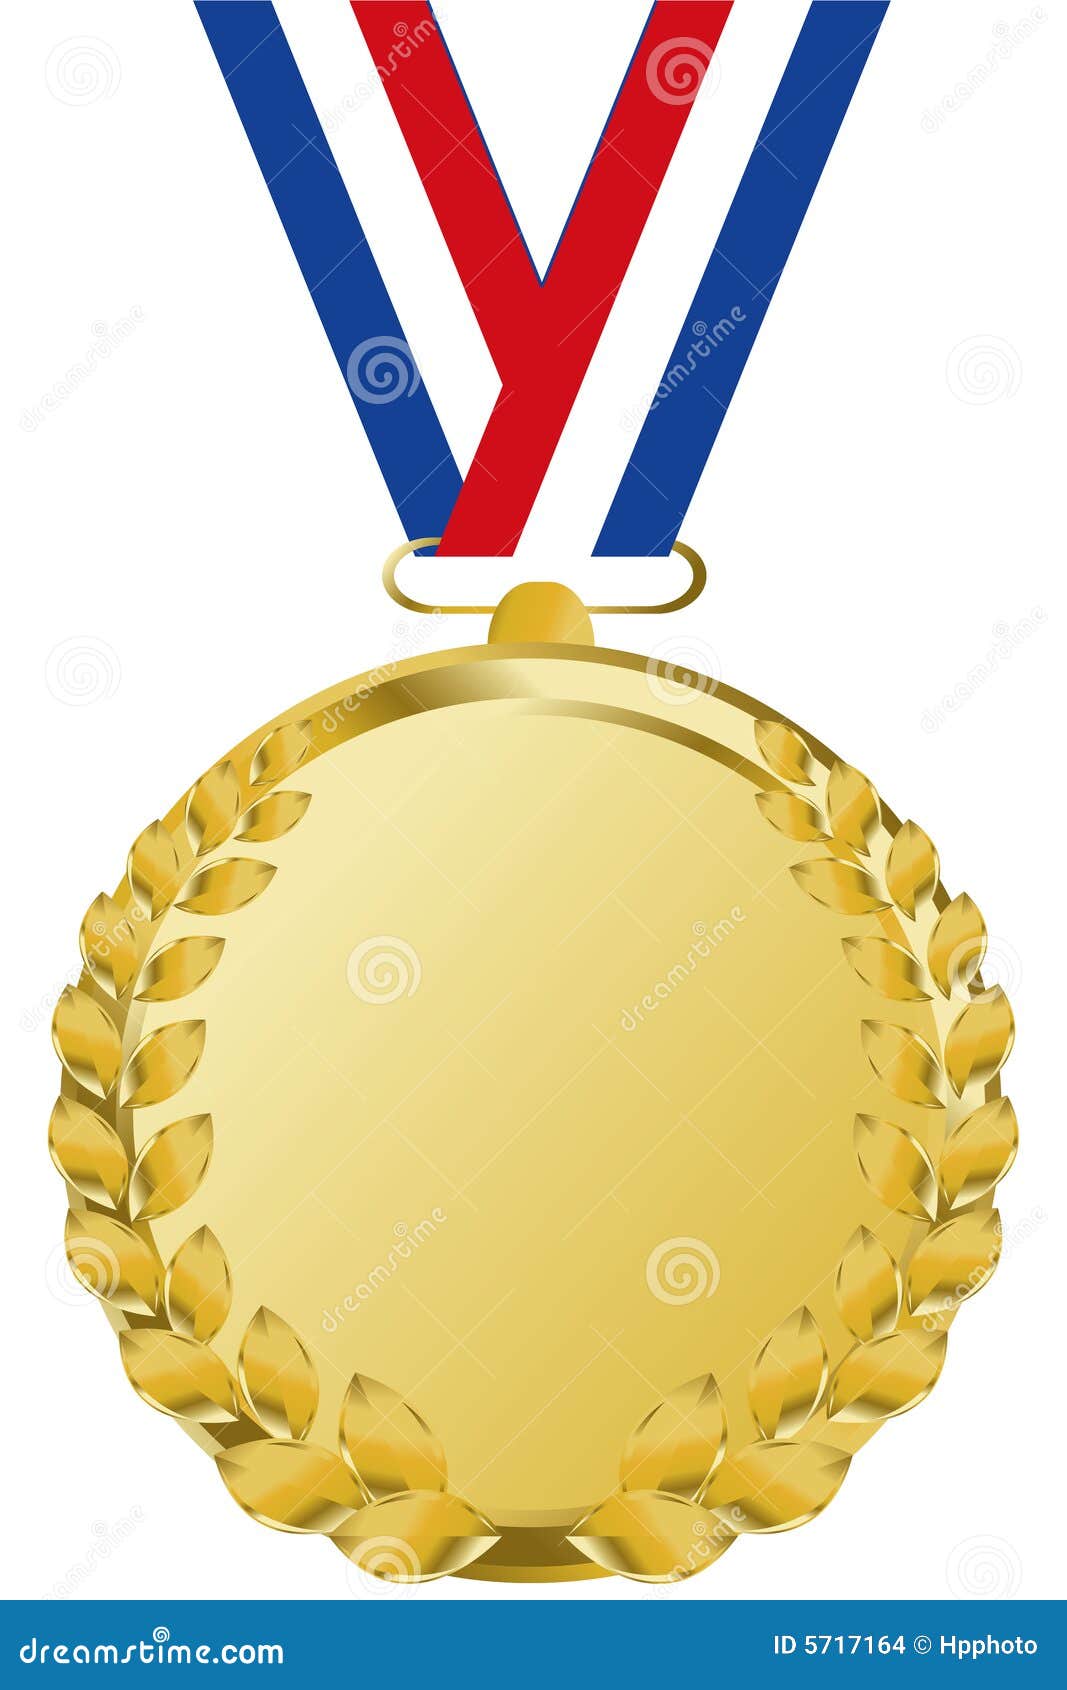 clipart of gold medals - photo #40